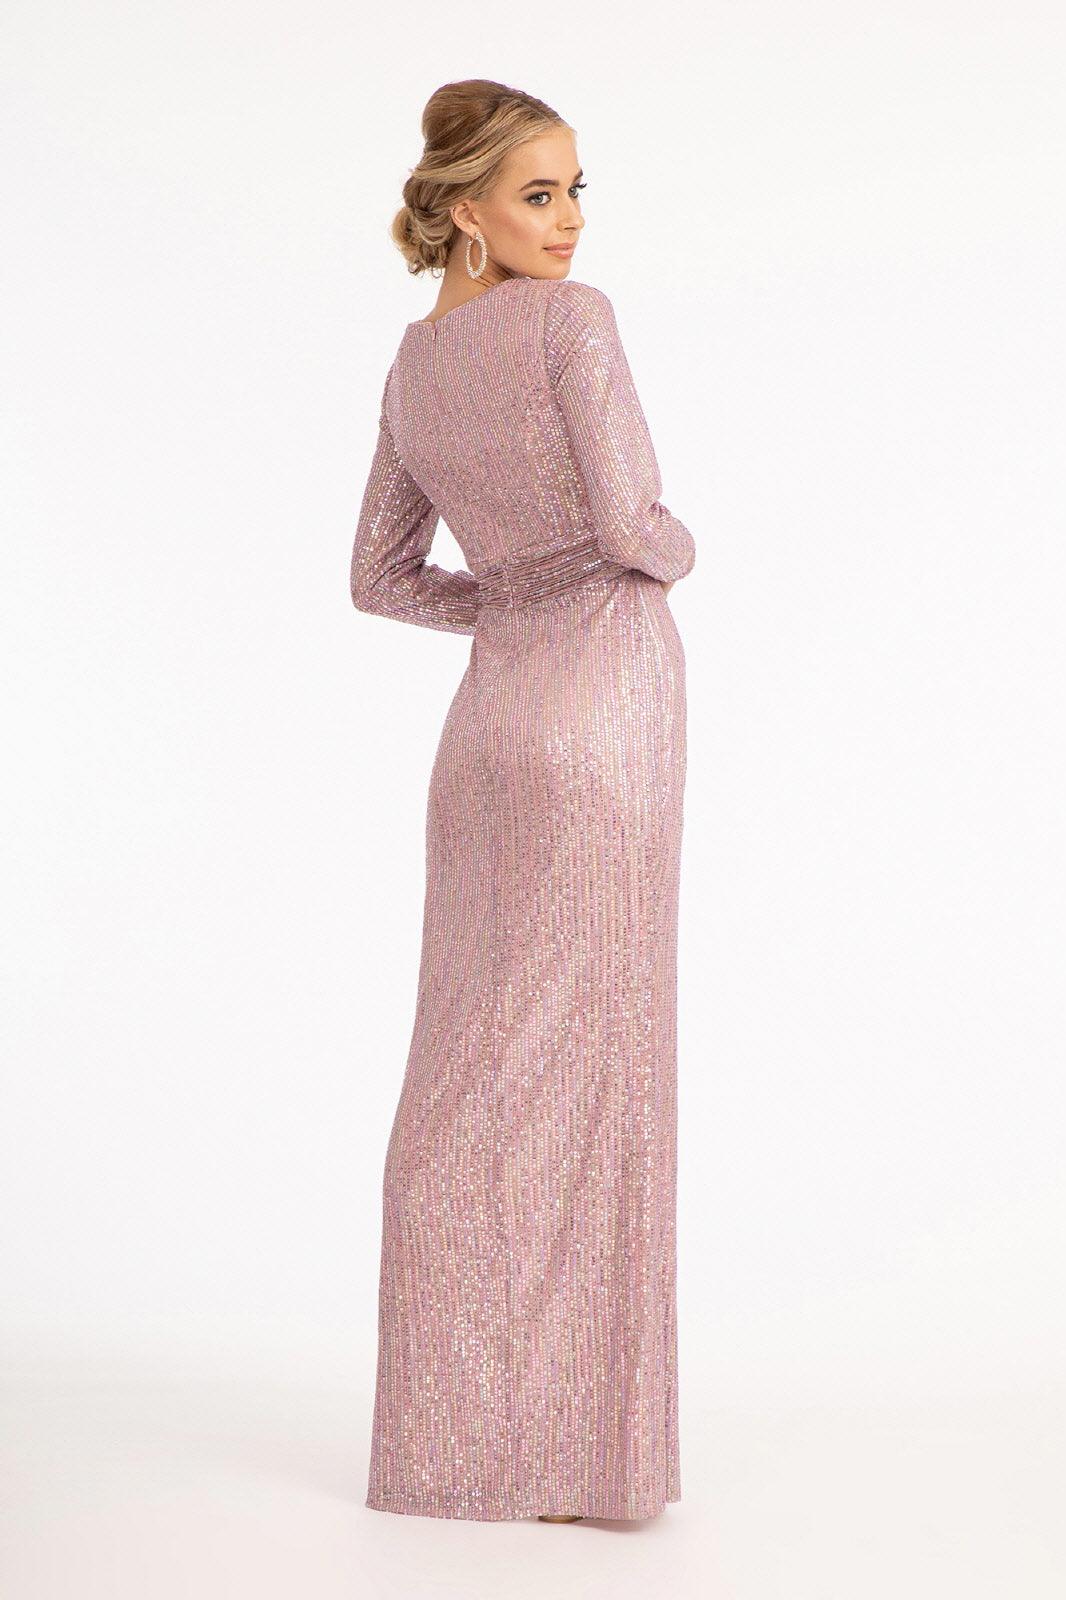 Long Sleeve Formal Mermaid Evening Dress - The Dress Outlet